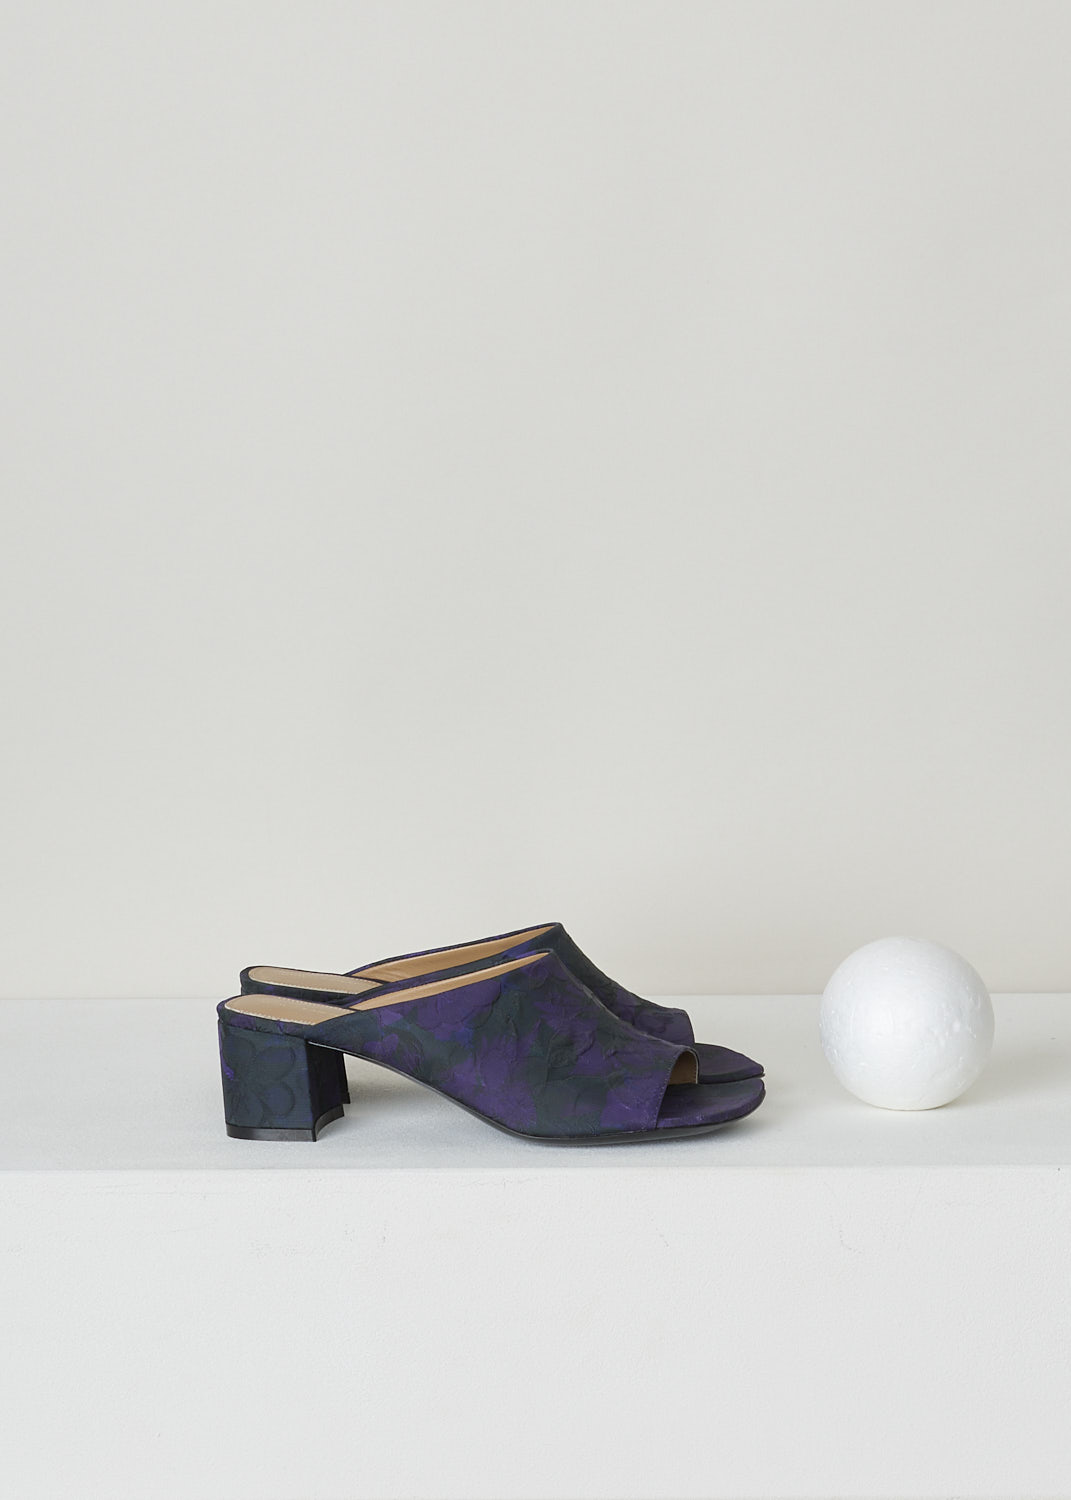 DRIES VAN NOTEN, PURPLE FLORAL MULES WITH BLOCK HEEL, WS231_285_QU704_DES_B976, Print, Purple, Side, These heeled slip-on mules have a dark base with a purple floral print. These mules have a square open-toe front and a block heel. 

